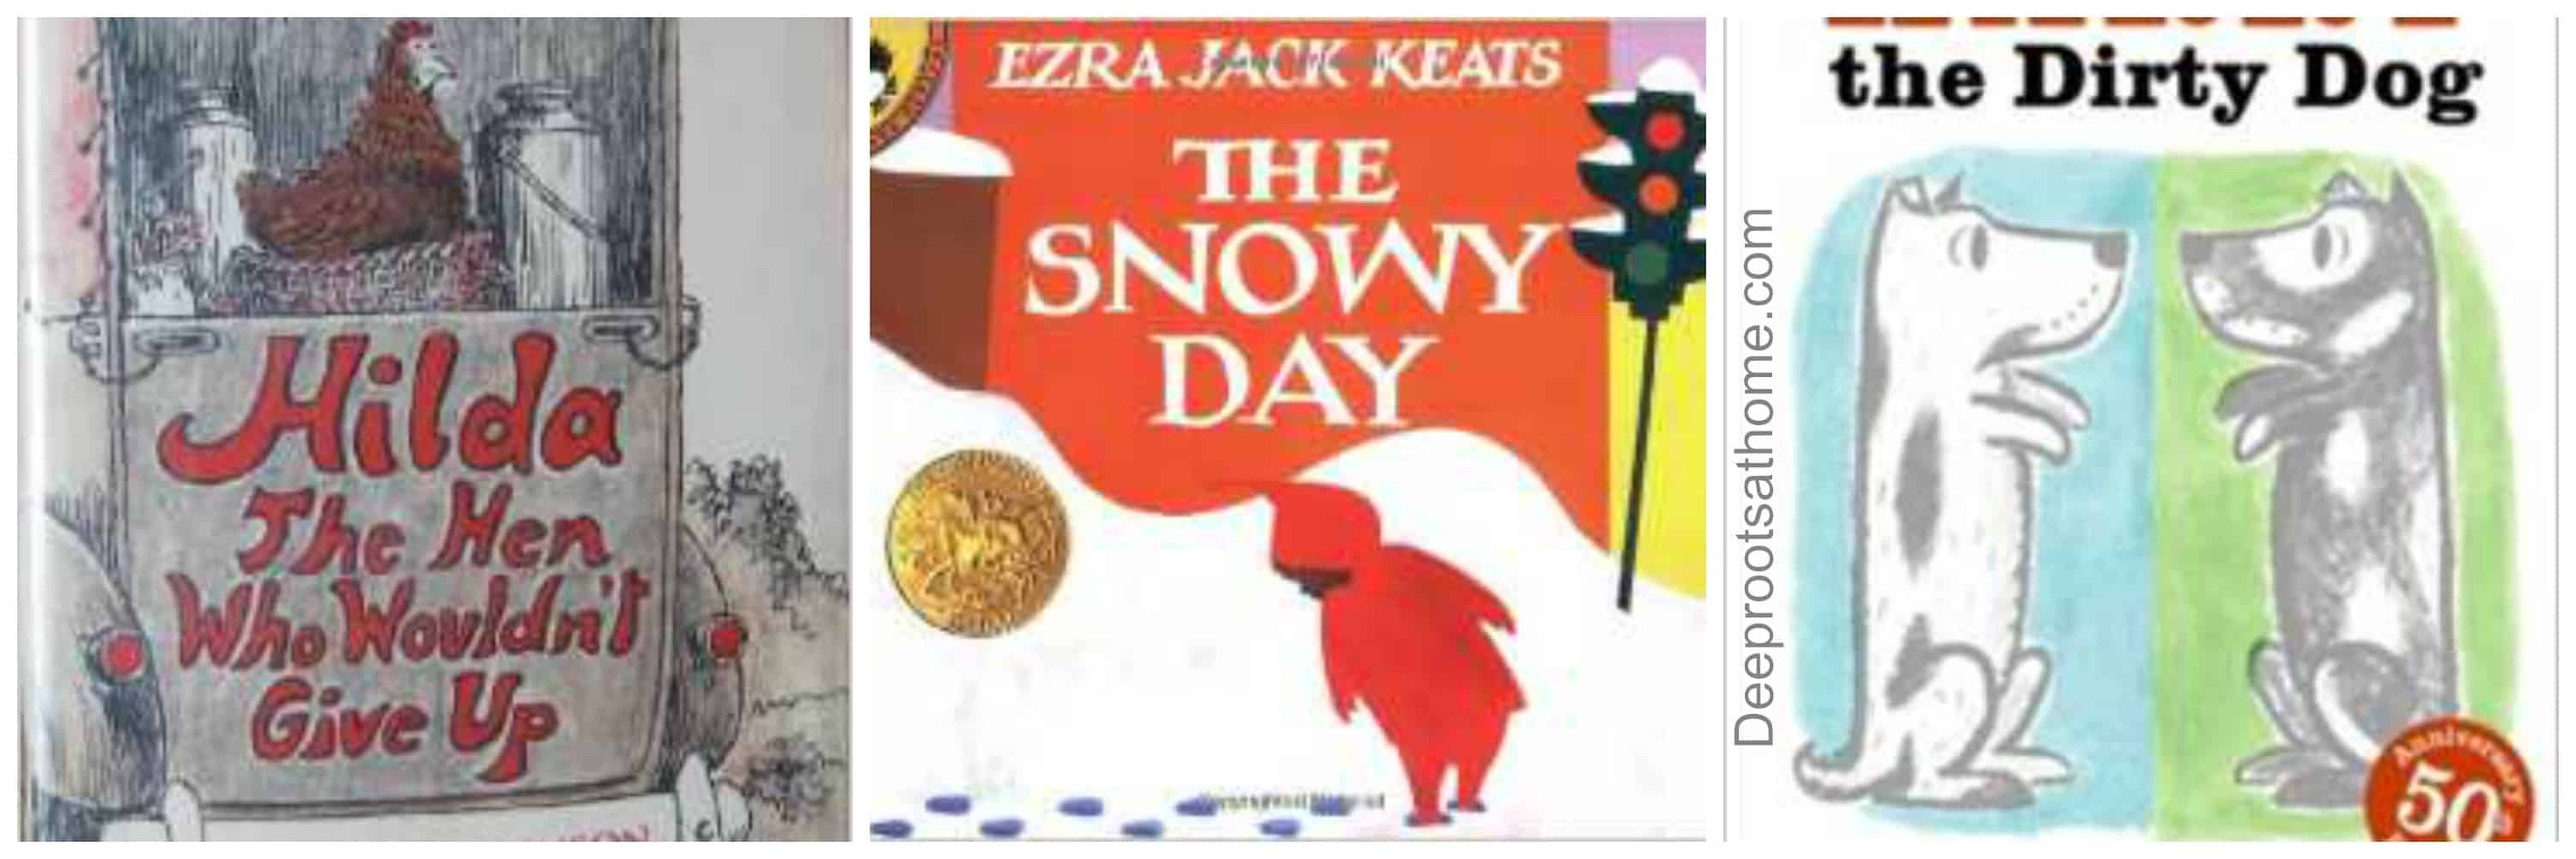 3 books: Hilda the Hen Who wouldn't give Up, The Snowy Day by Ezra Jack Keats, and Harry the Dirty Dog.